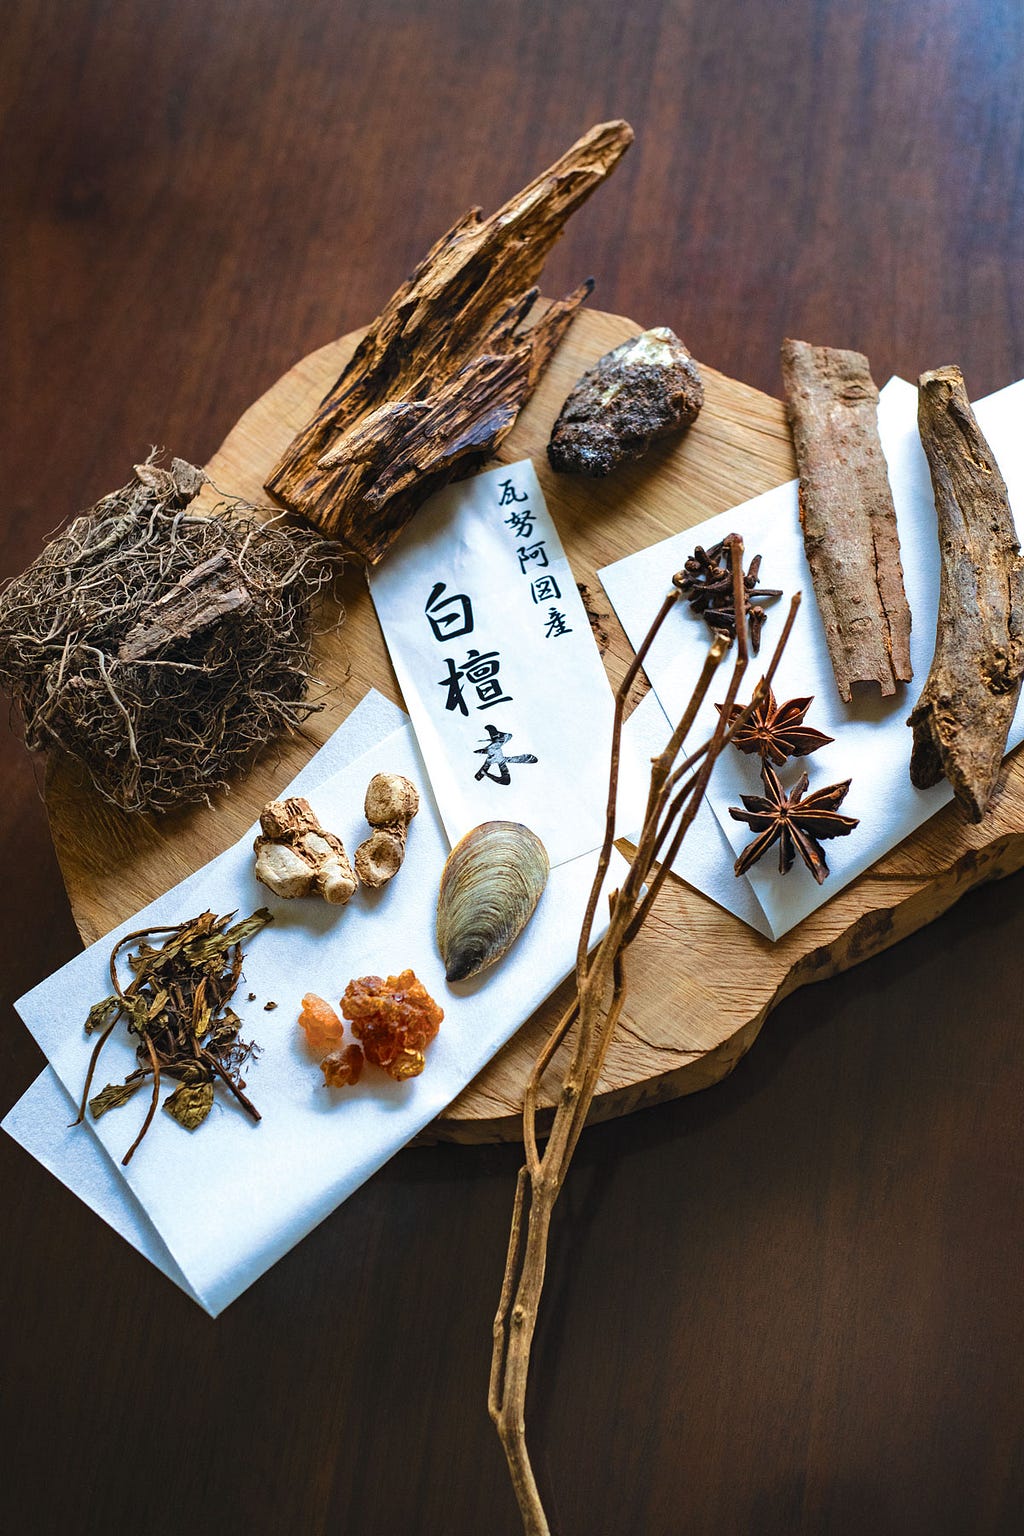 Raw ingredients for making incense: herbs, dried flowers, and bark.